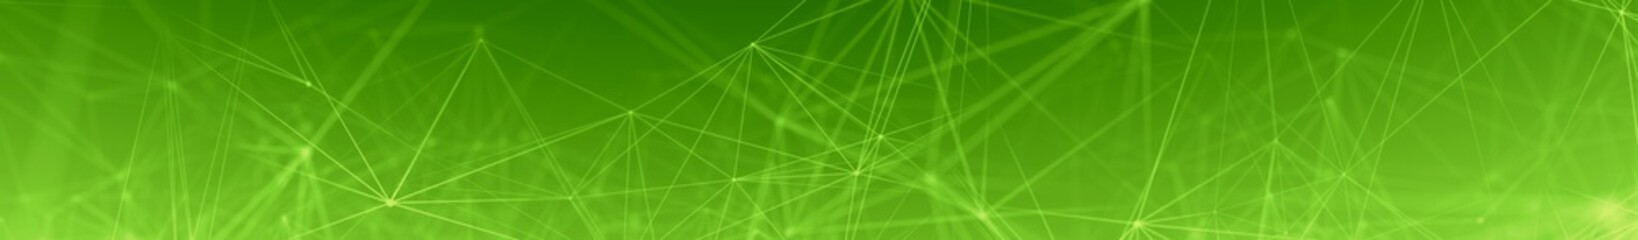 Fototapeta na wymiar Abstract background with triangular cells for design. Bright green digital illustration with polygons on a vivid gradient background as Full Web Banner size. Concept for eco intelligence network.